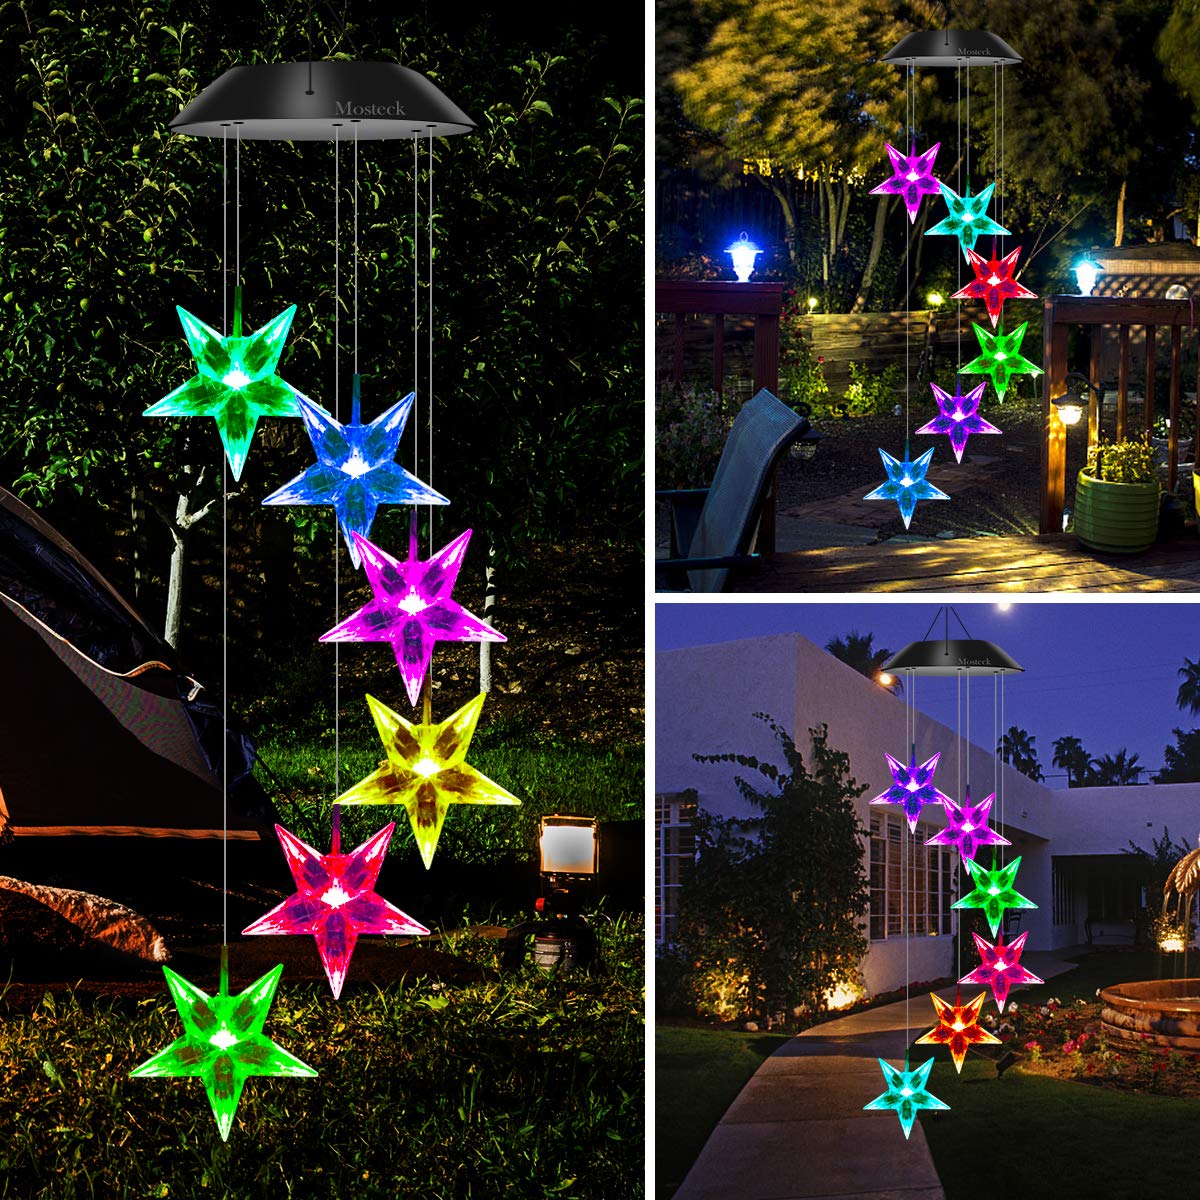 Hanging Decorative Romantic Patio Lights for Yard Garden Home Party Mosteck Wind Chimes Outdoor Solar Moon & Stars Wind Chime Lights Color Changing LED Mobile Wind Chime Best Birthday Gifts for Mom